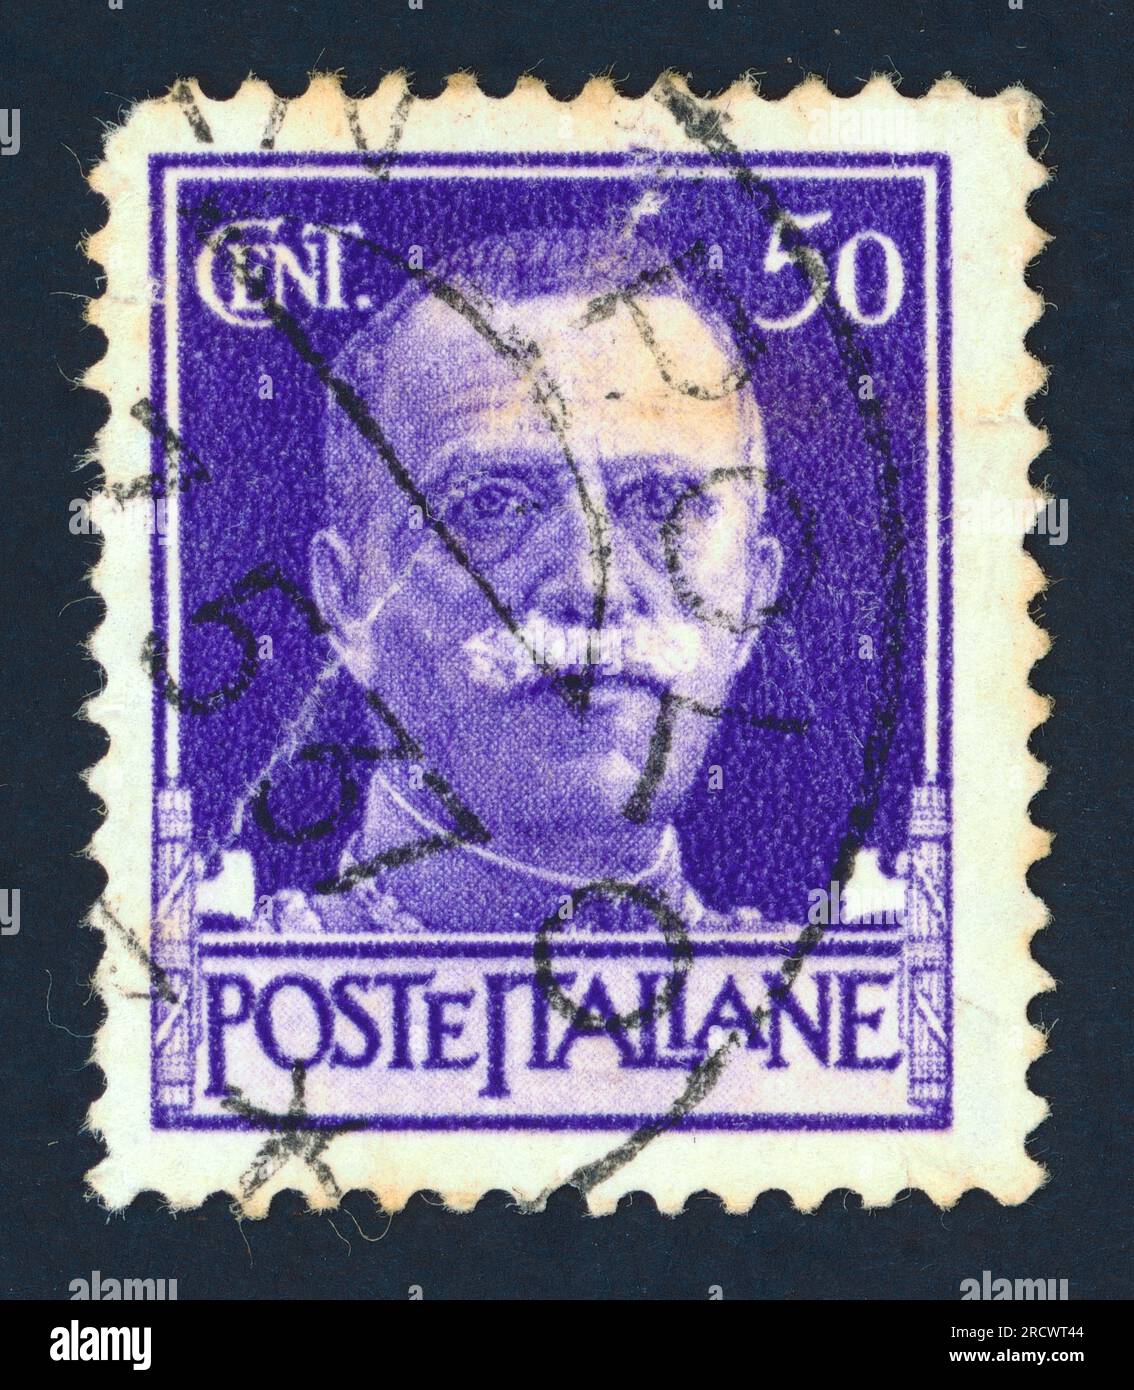 King Victor Emmanuel III (1869 – 1947). A stamp issued in 1929. Stock Photo